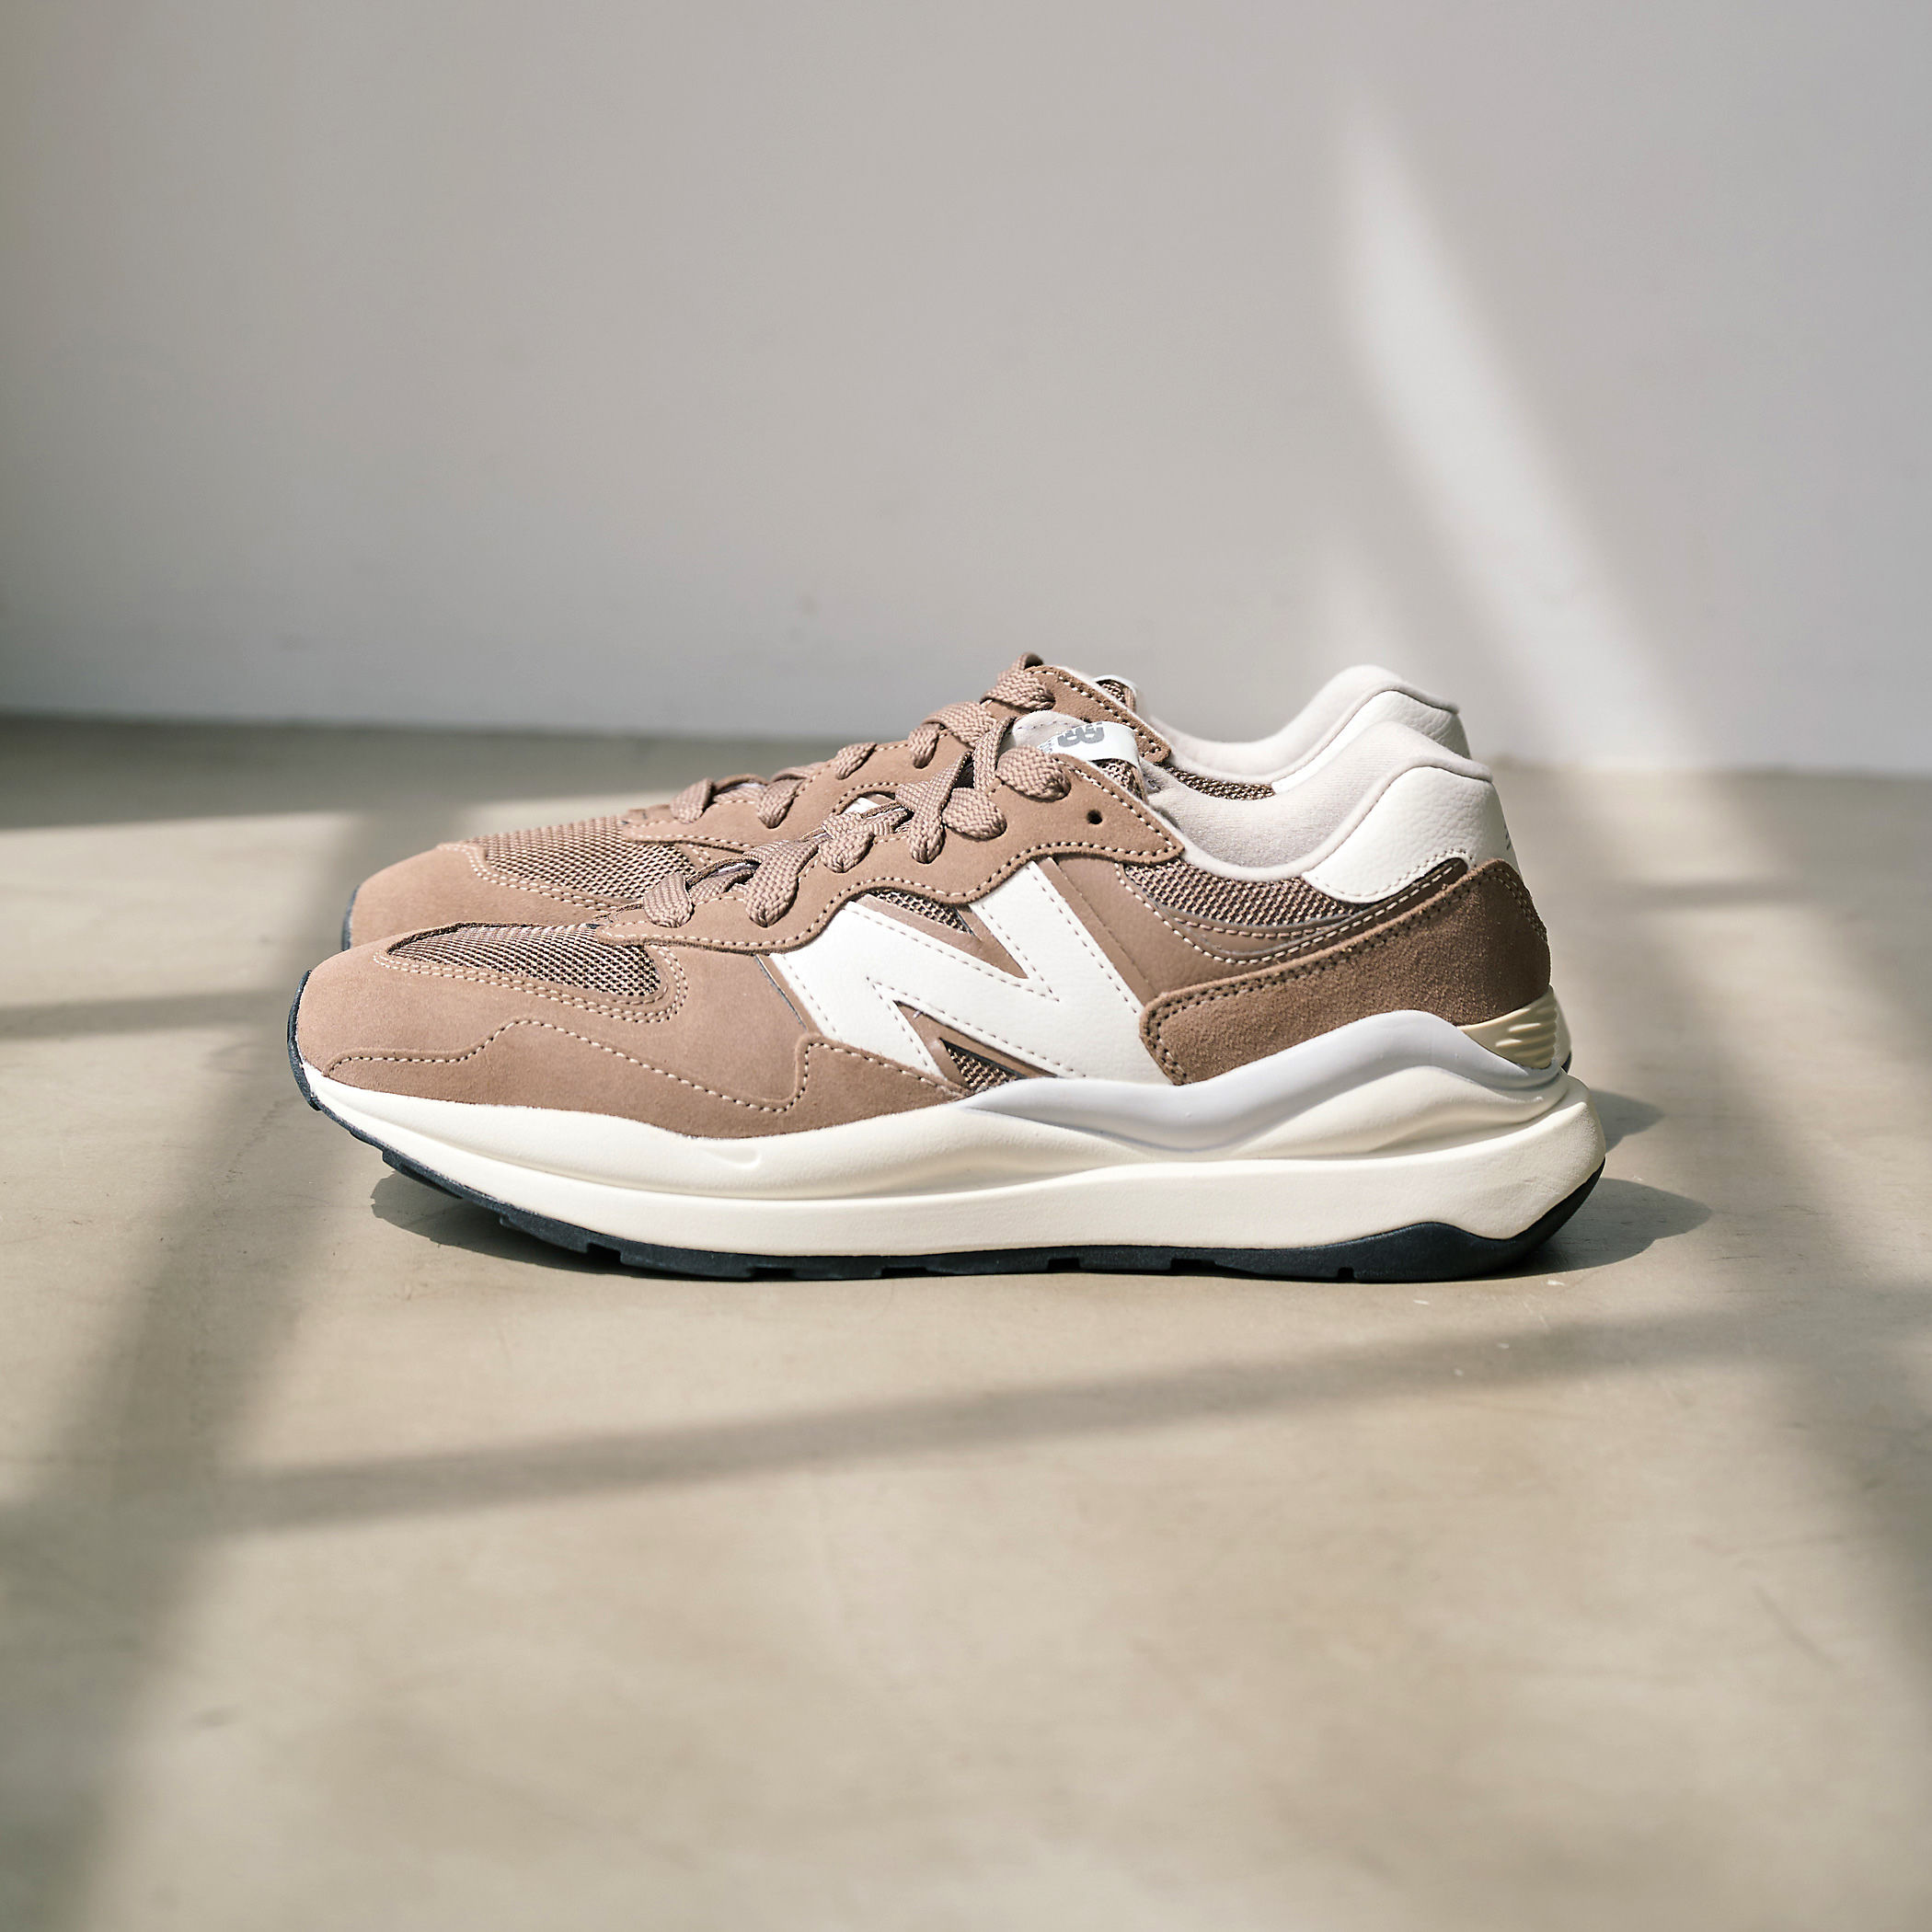 UNITED ARROWS green label relaxing＜New Balance＞ 57/40 スニーカー / 5740￥15,400